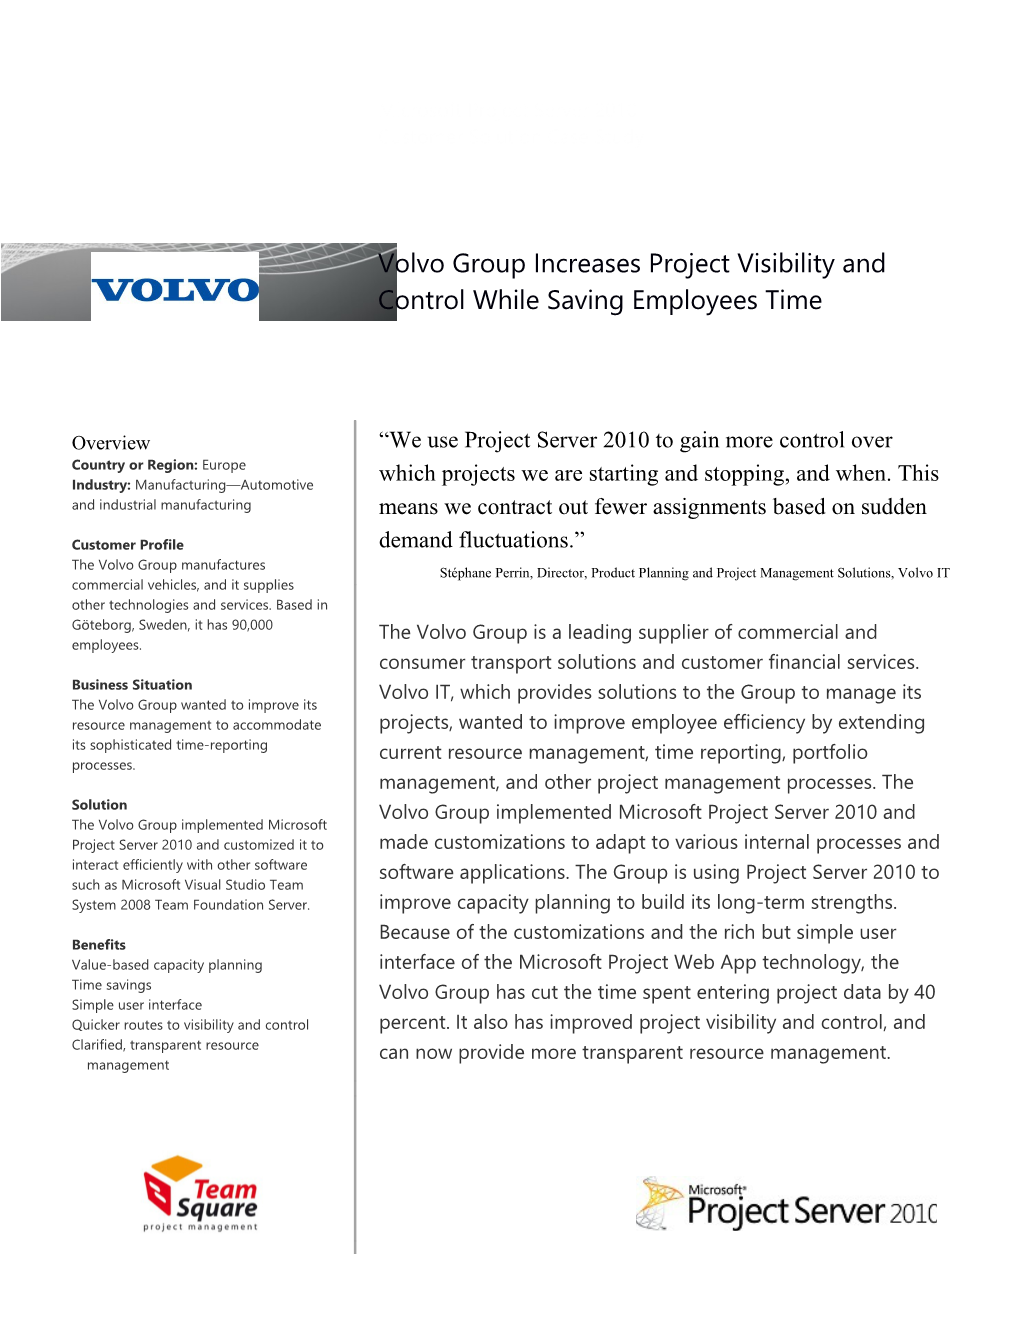 Volvo Group Increases Project Visibility and Control While Saving Employees Time